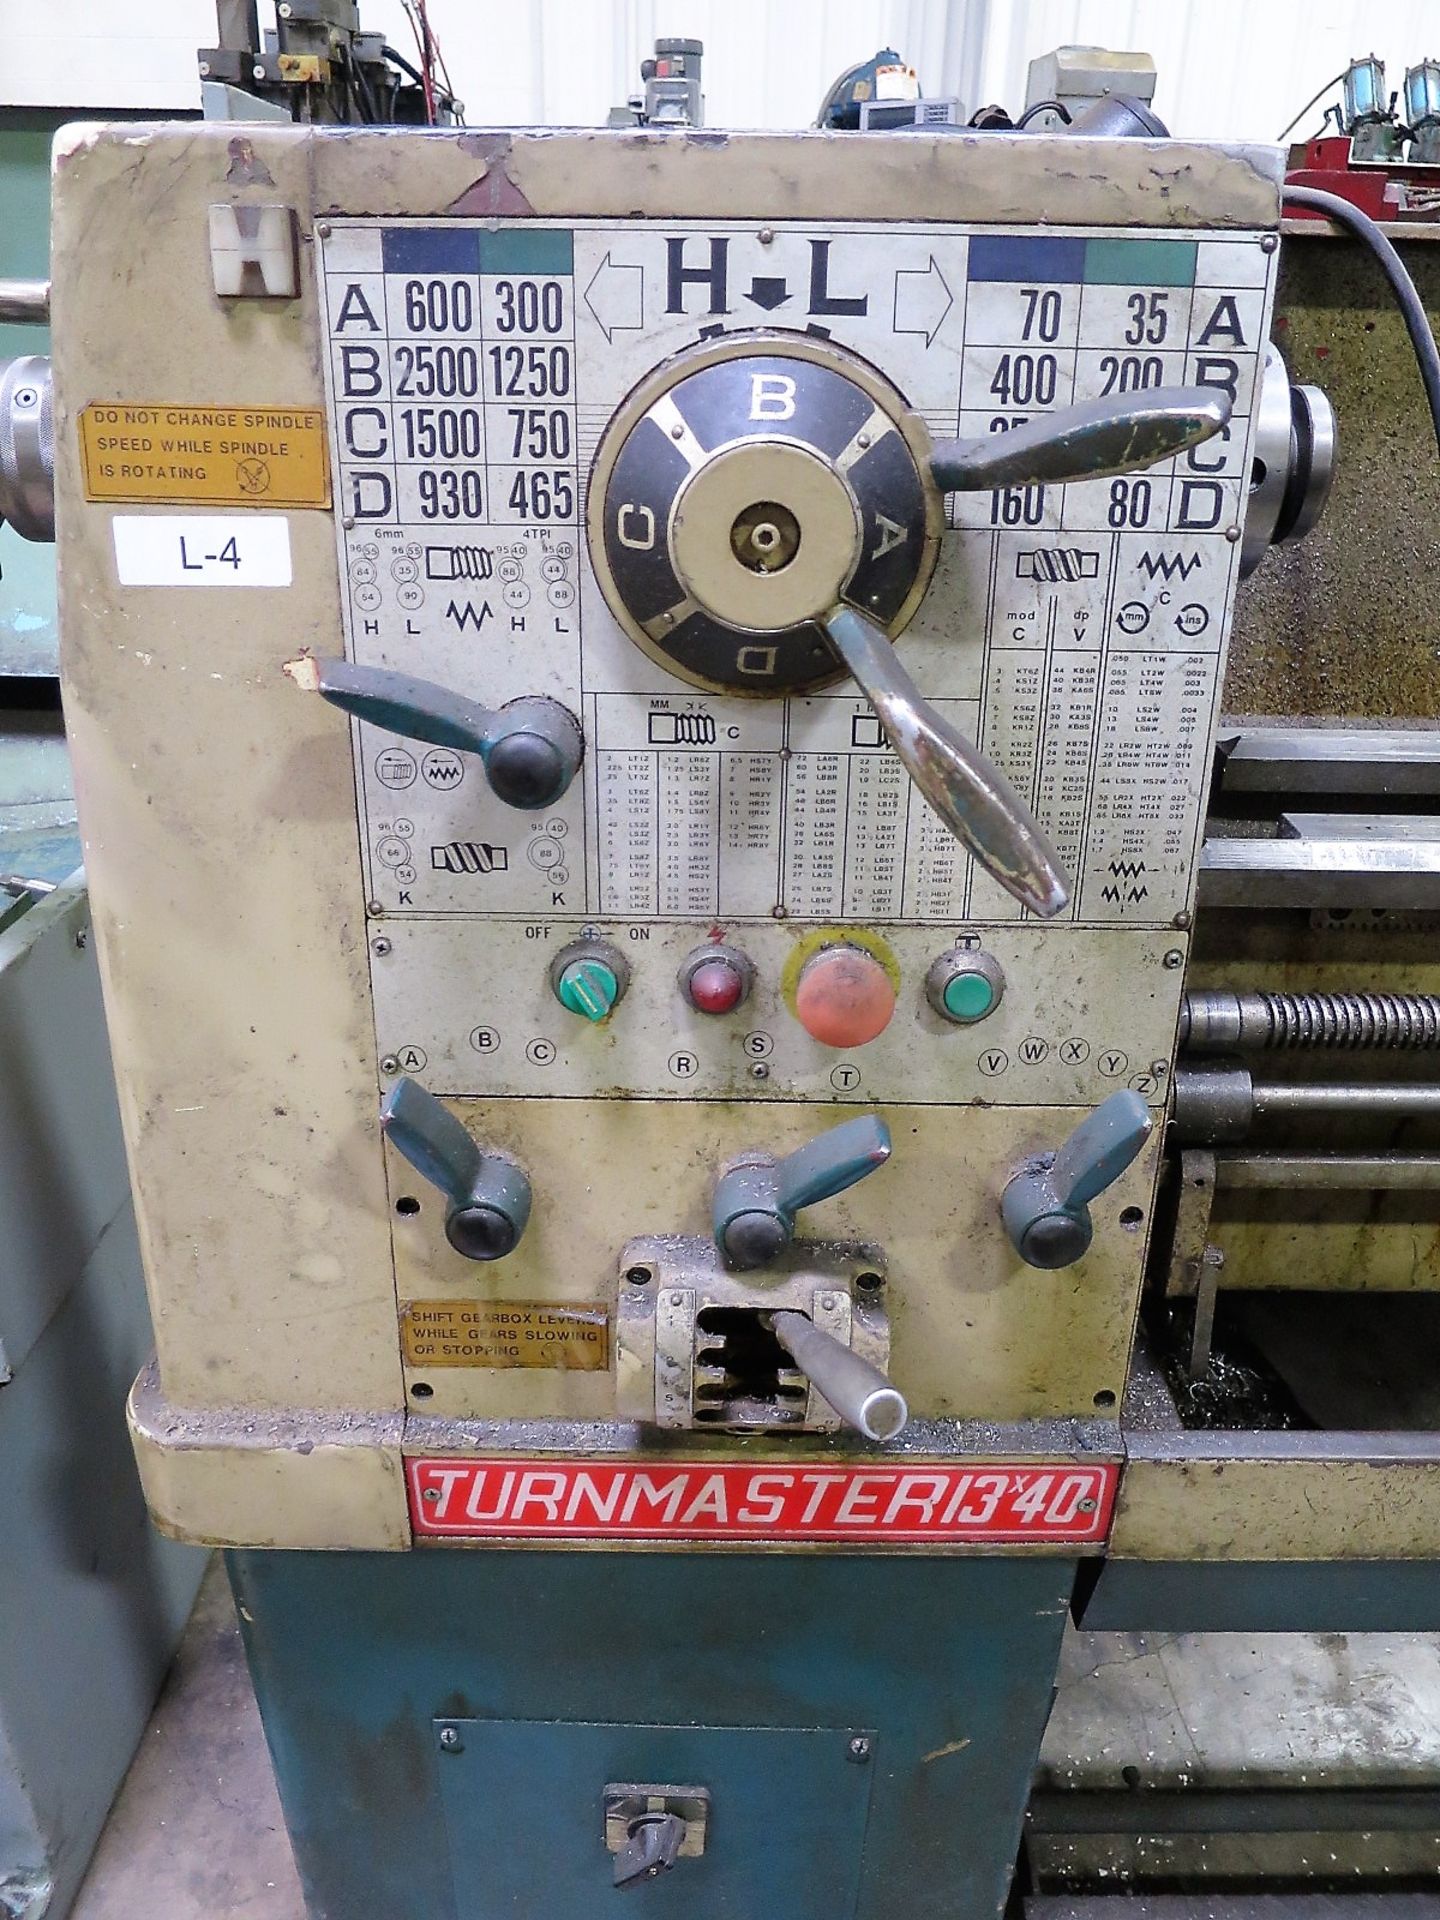 Turn master 1340 40" Center High Precision Engine Lathe, S/N 13482040499 - Image 2 of 6